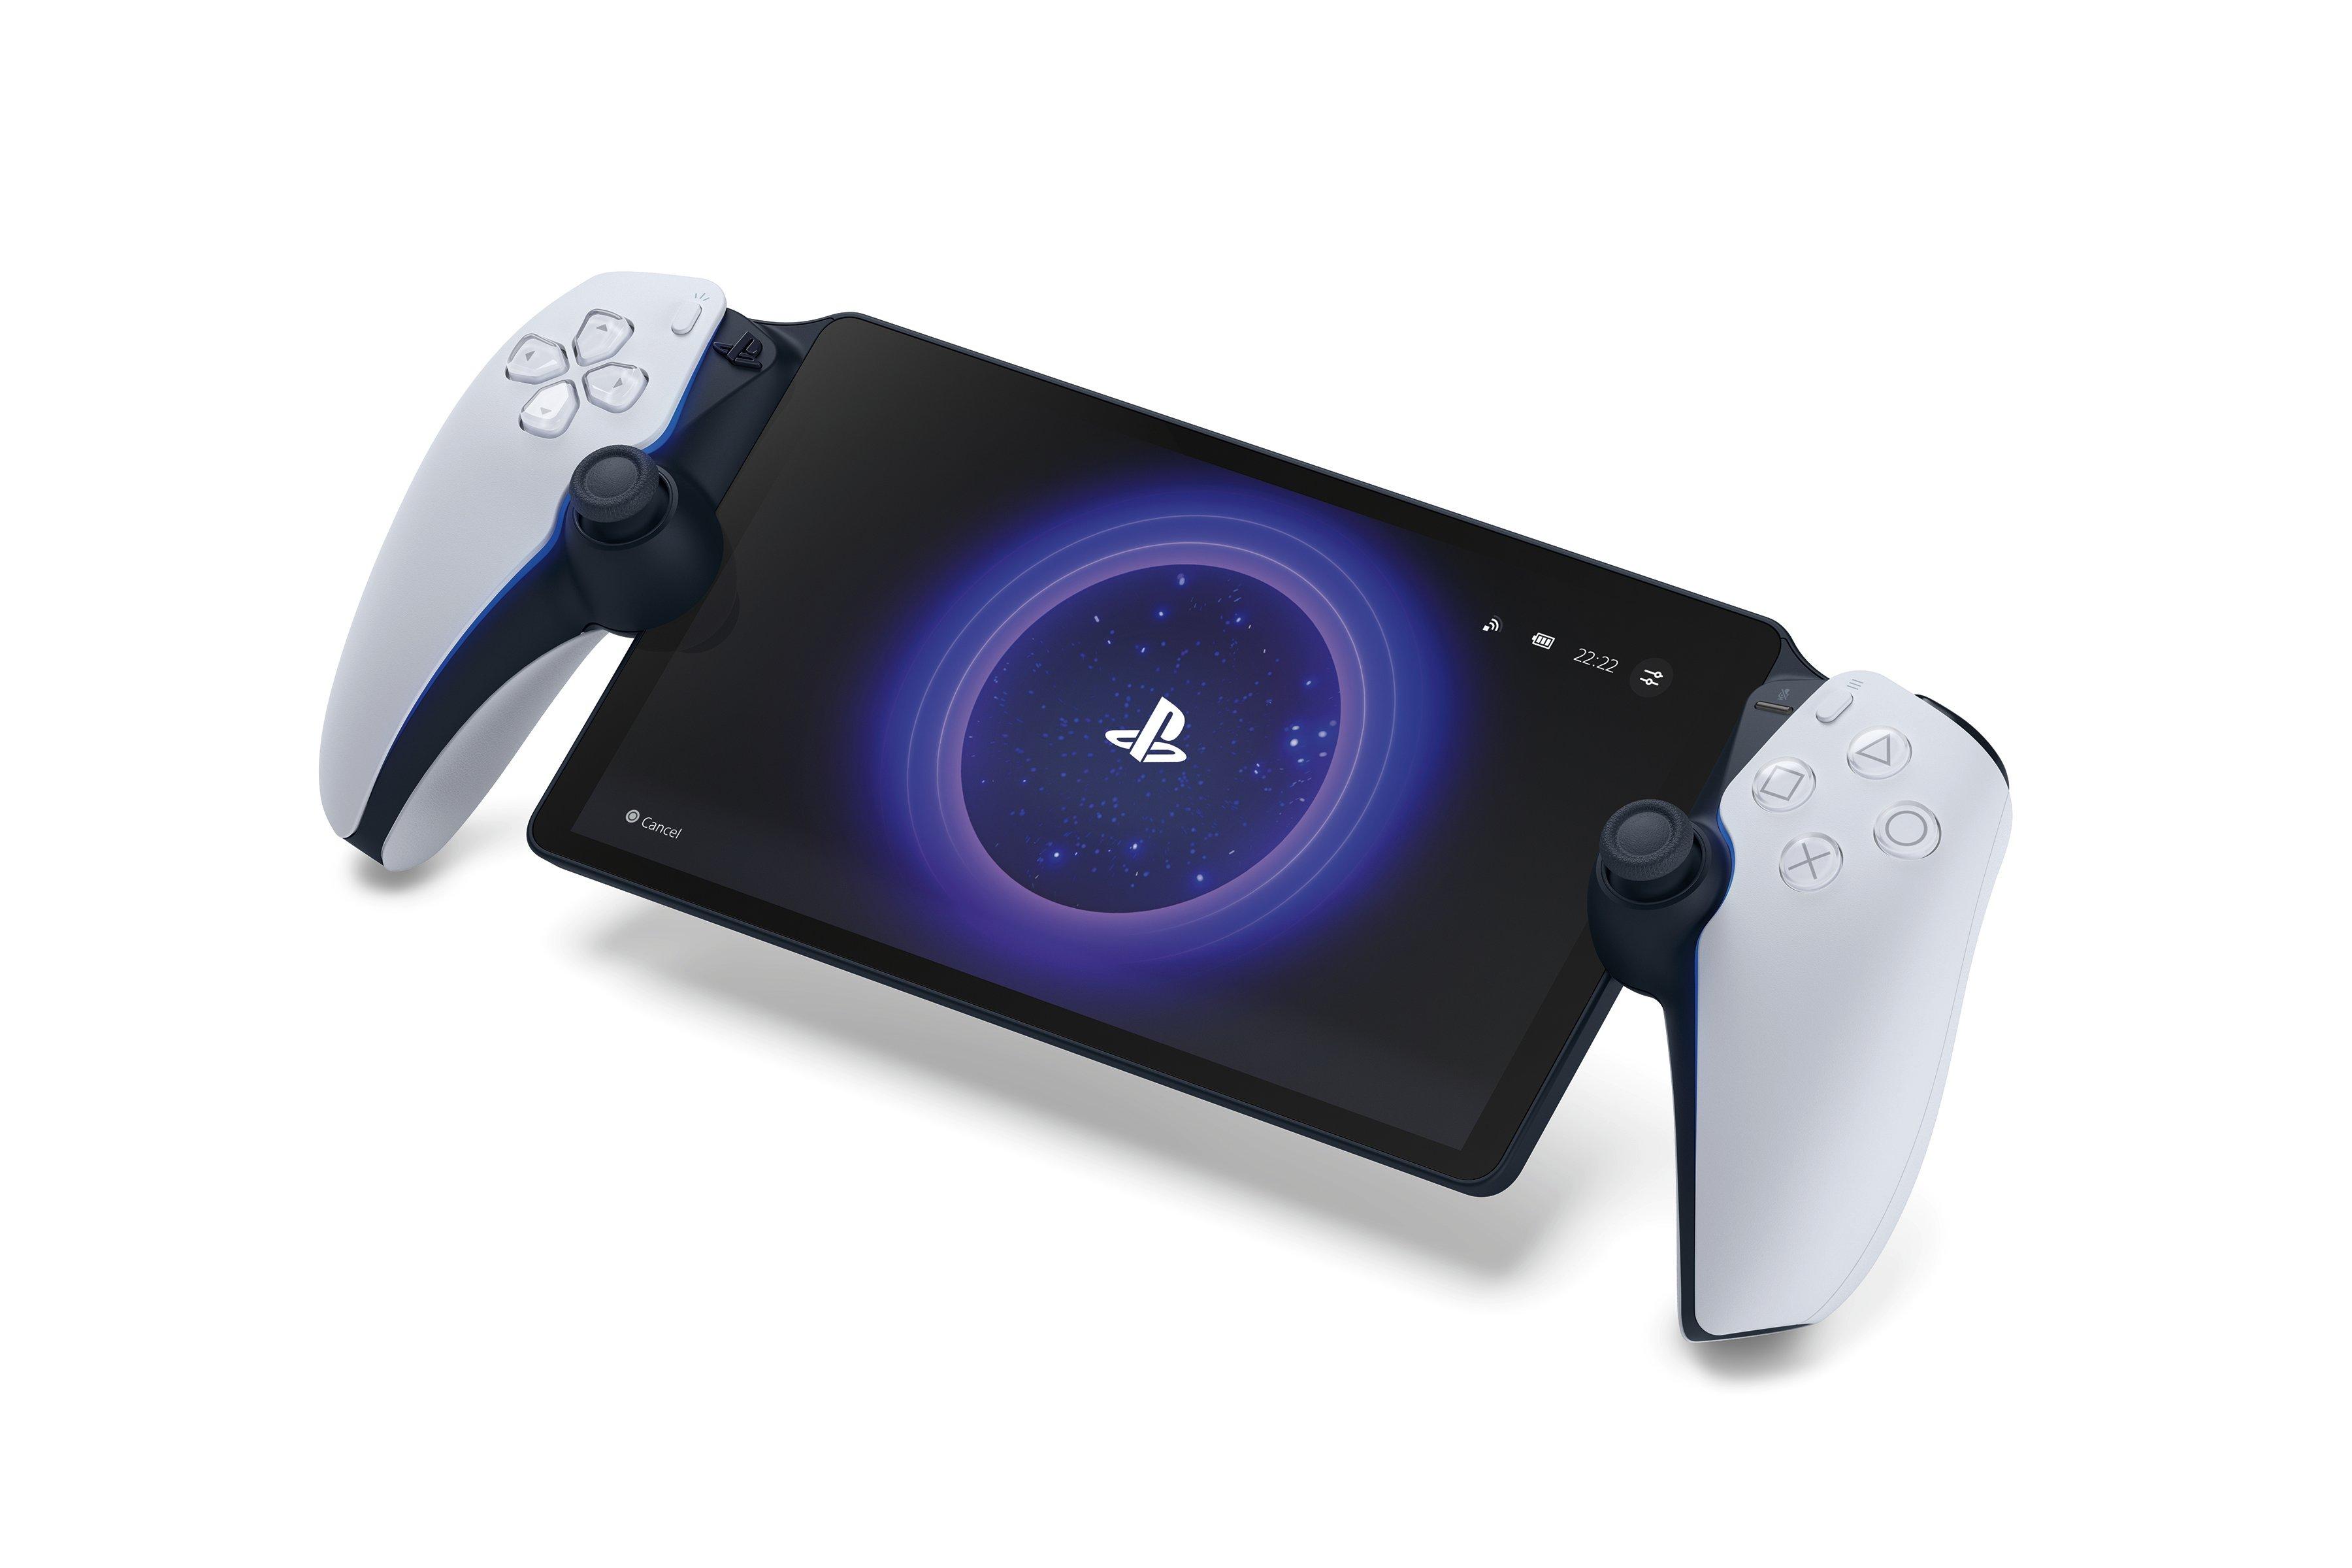 BRAND NEW PLAYSTATION PORTAL REMOTE PLAYER WITH 2 YEAR EXTENDED